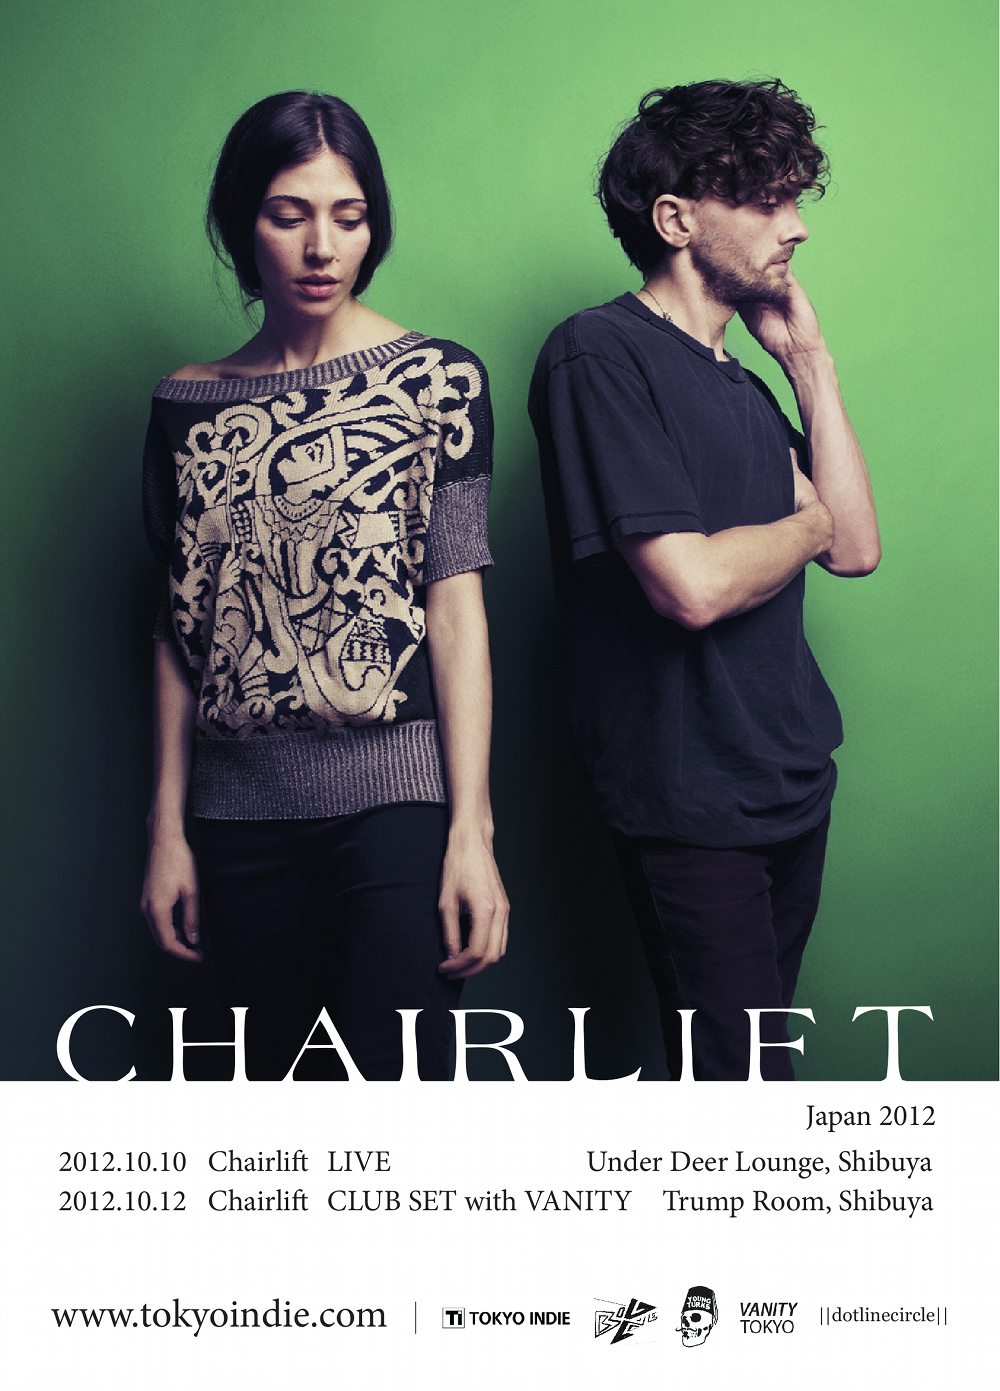 Chairlift Japan Tour Main Image